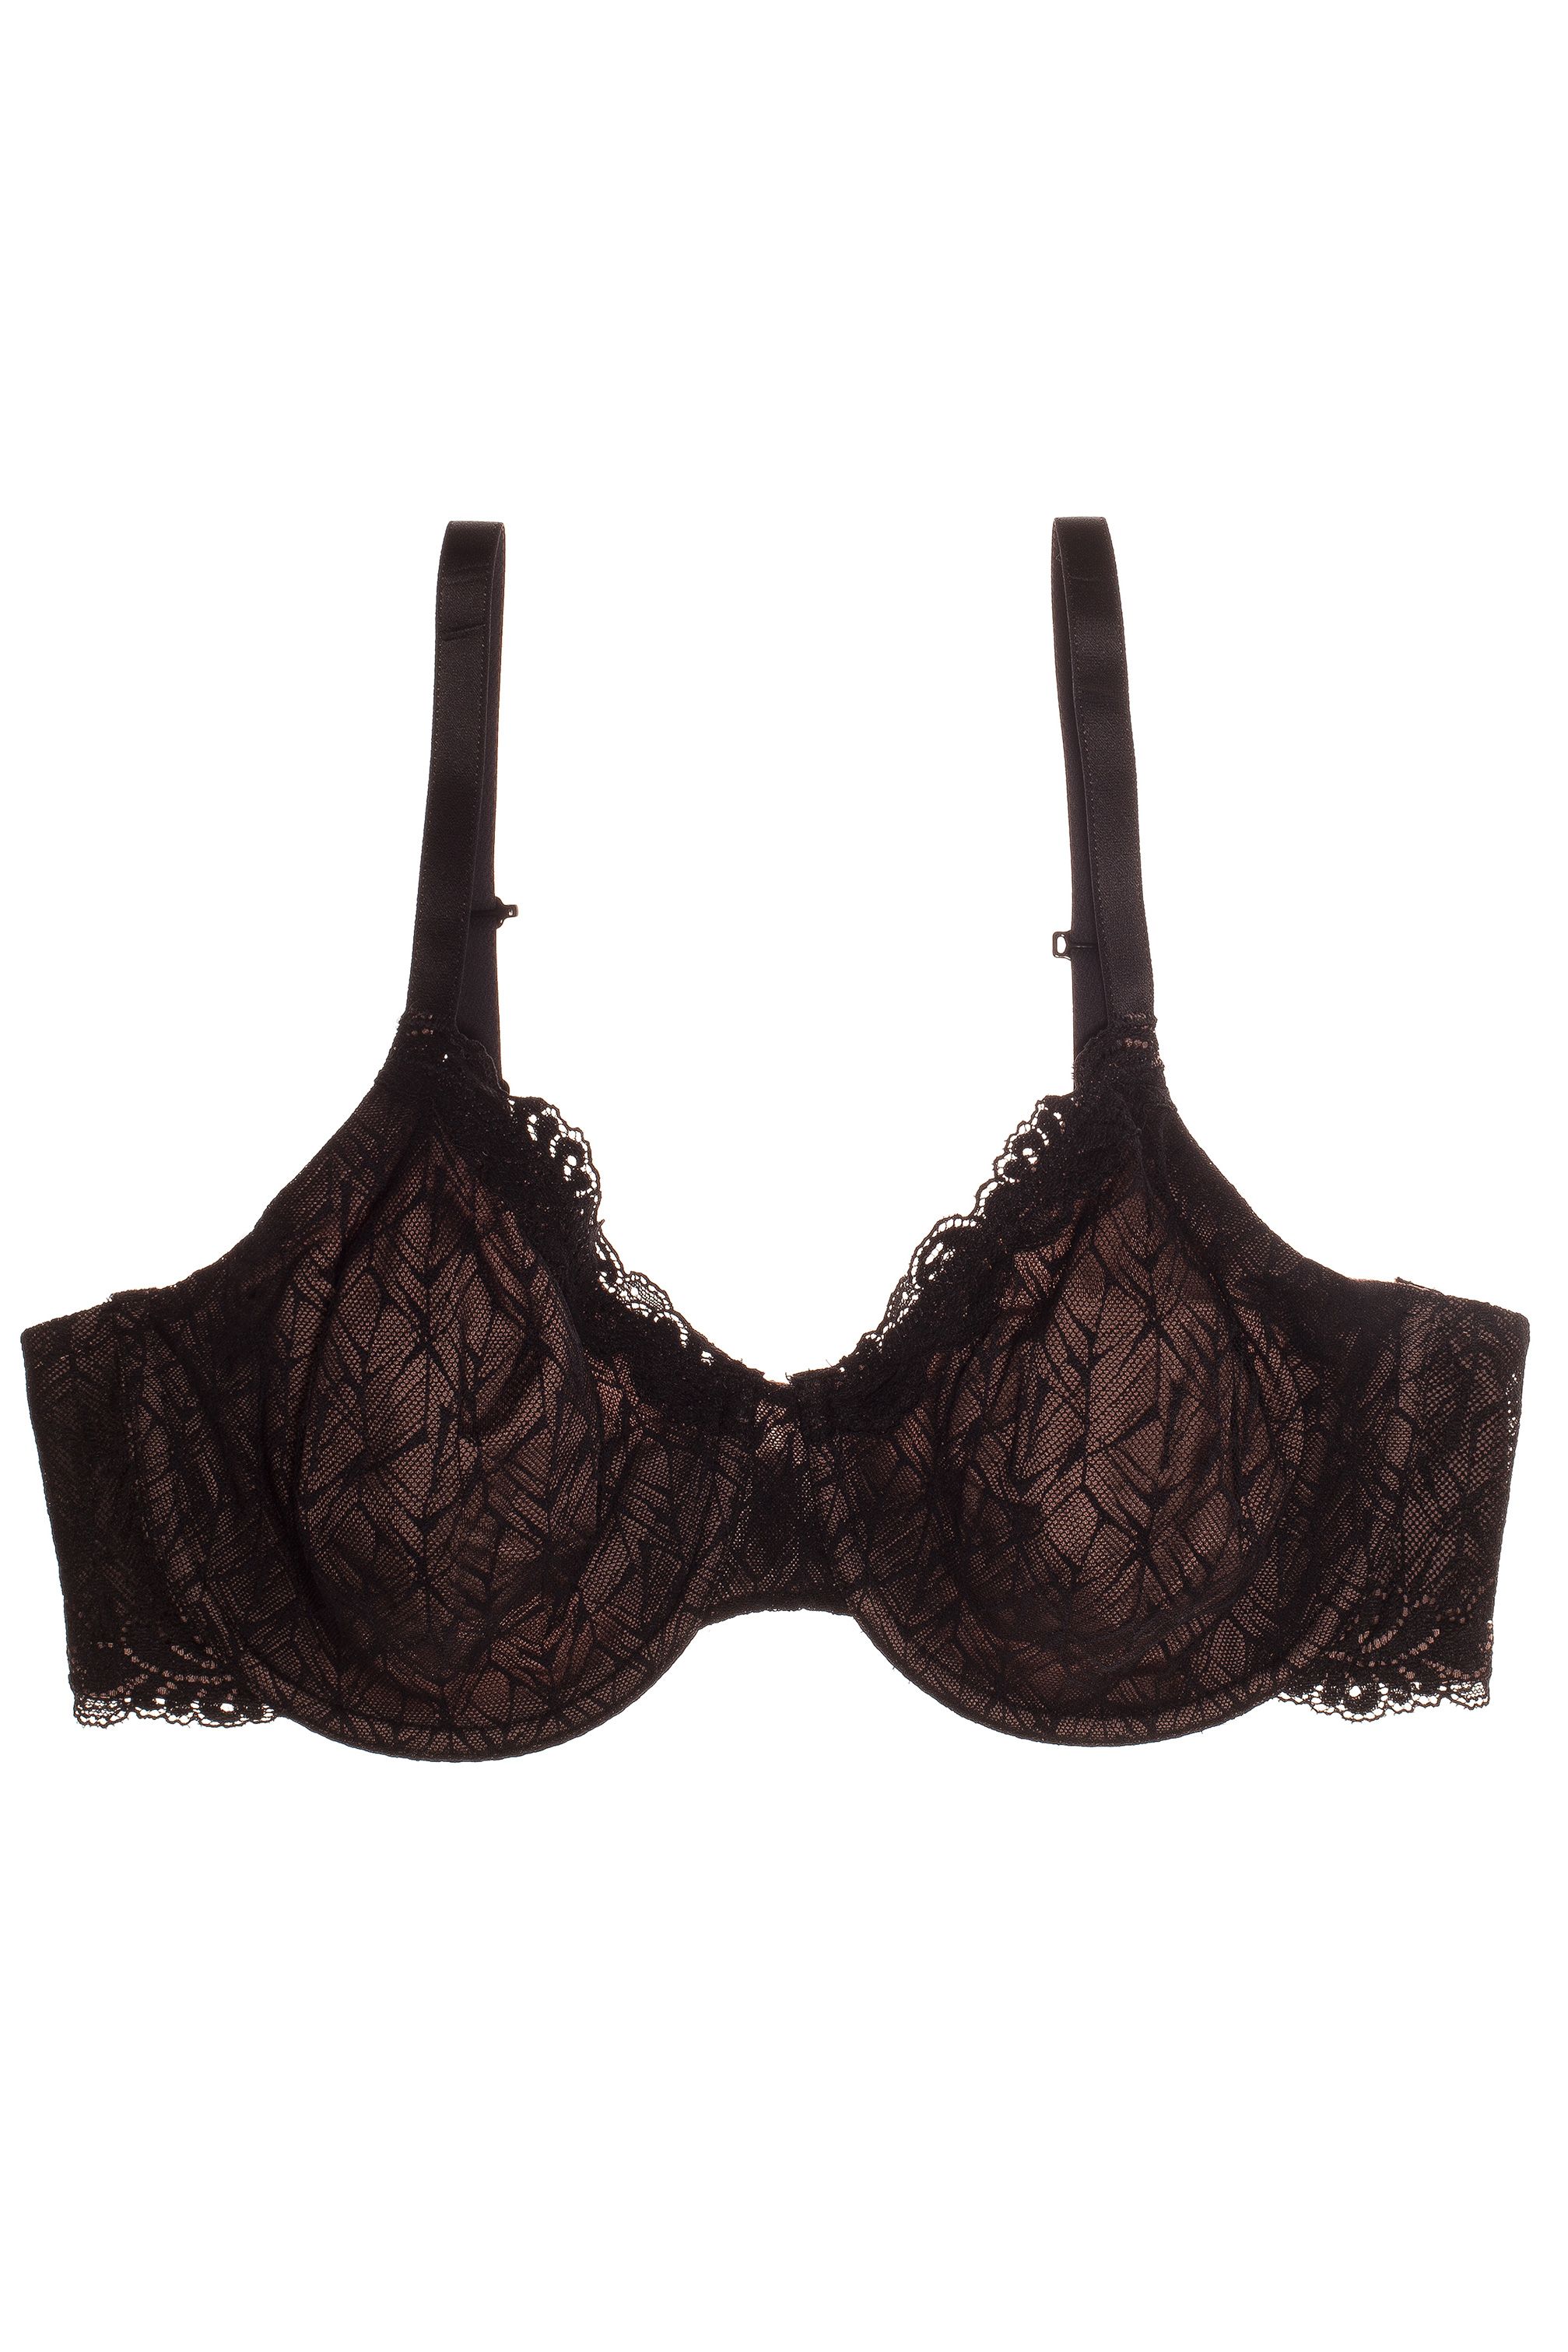 Underwired Bras in the size 32DD for Women on sale - prices in dubai